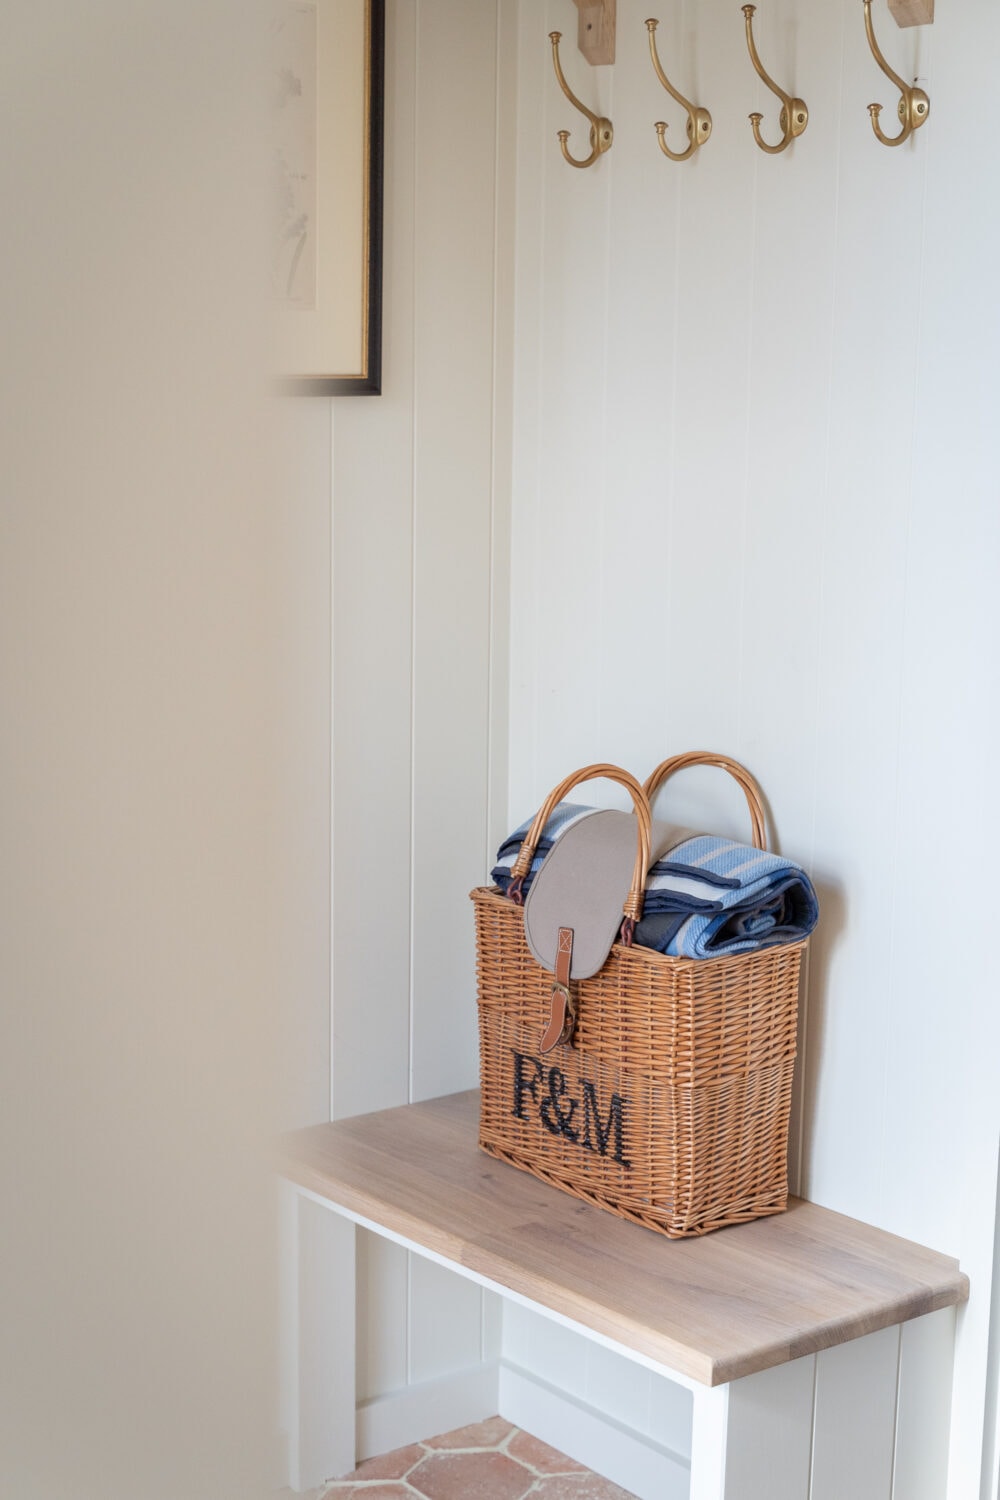 A detail image of a Fortnum and Mason Basket in the cloakroom of a Berkshire AirBnB